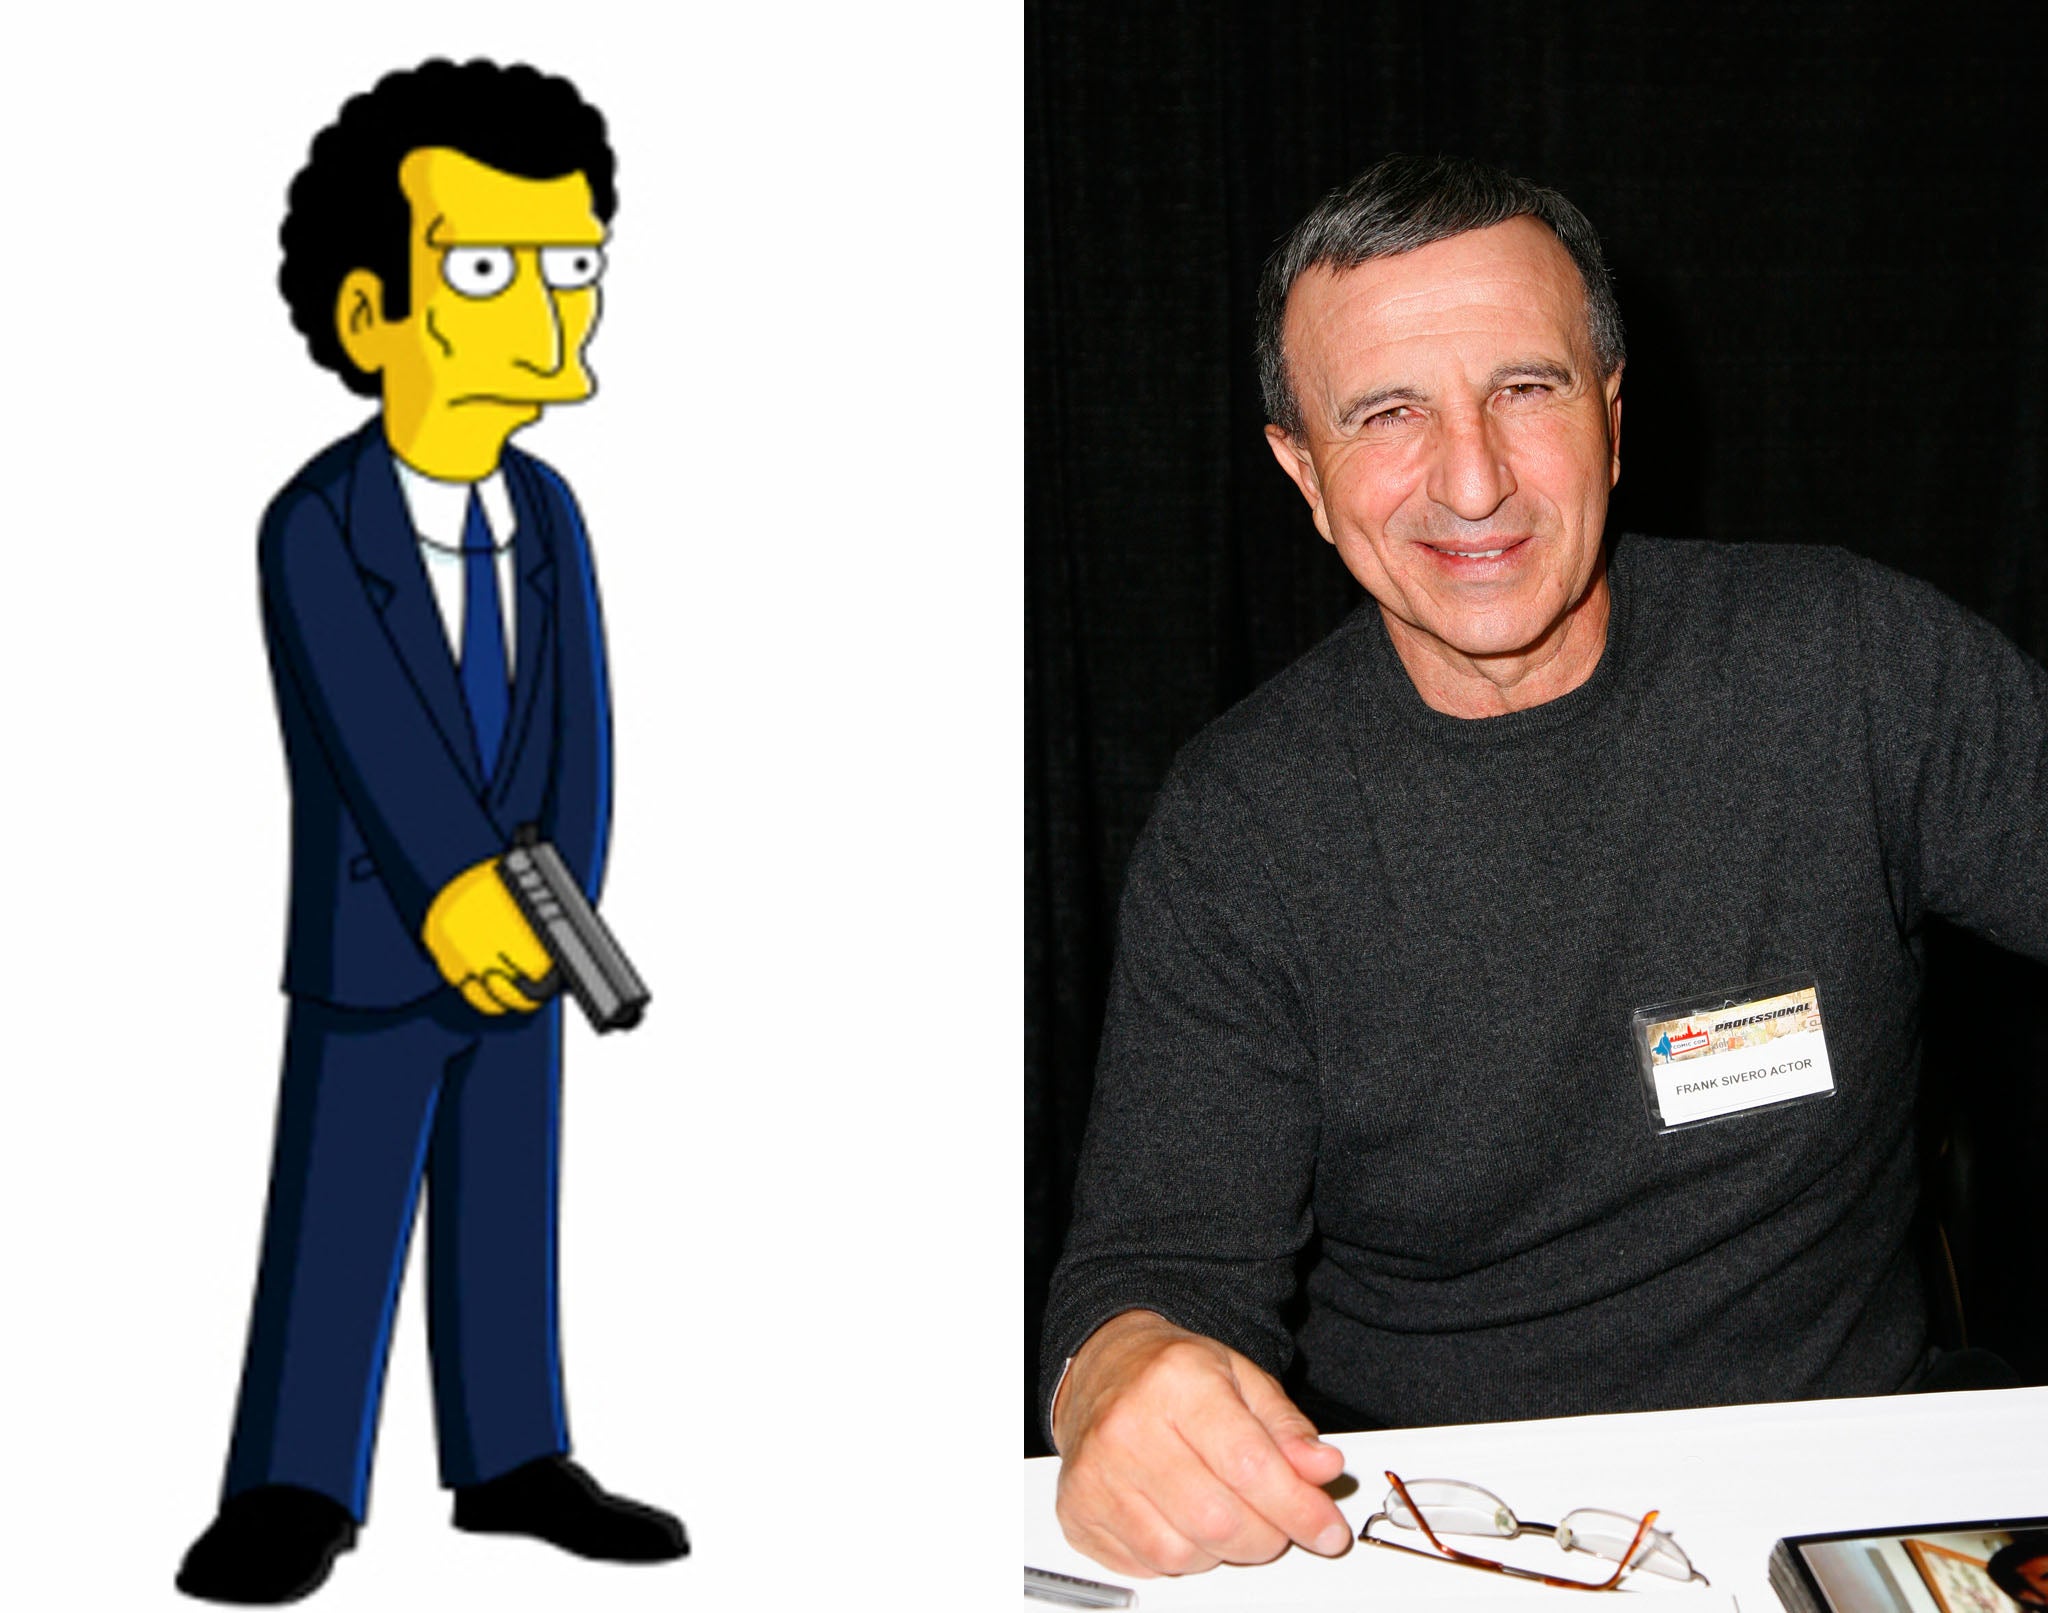 Frank Sivero (right) claims The Simpsons based Mafia character Louie on his Goodfellas character